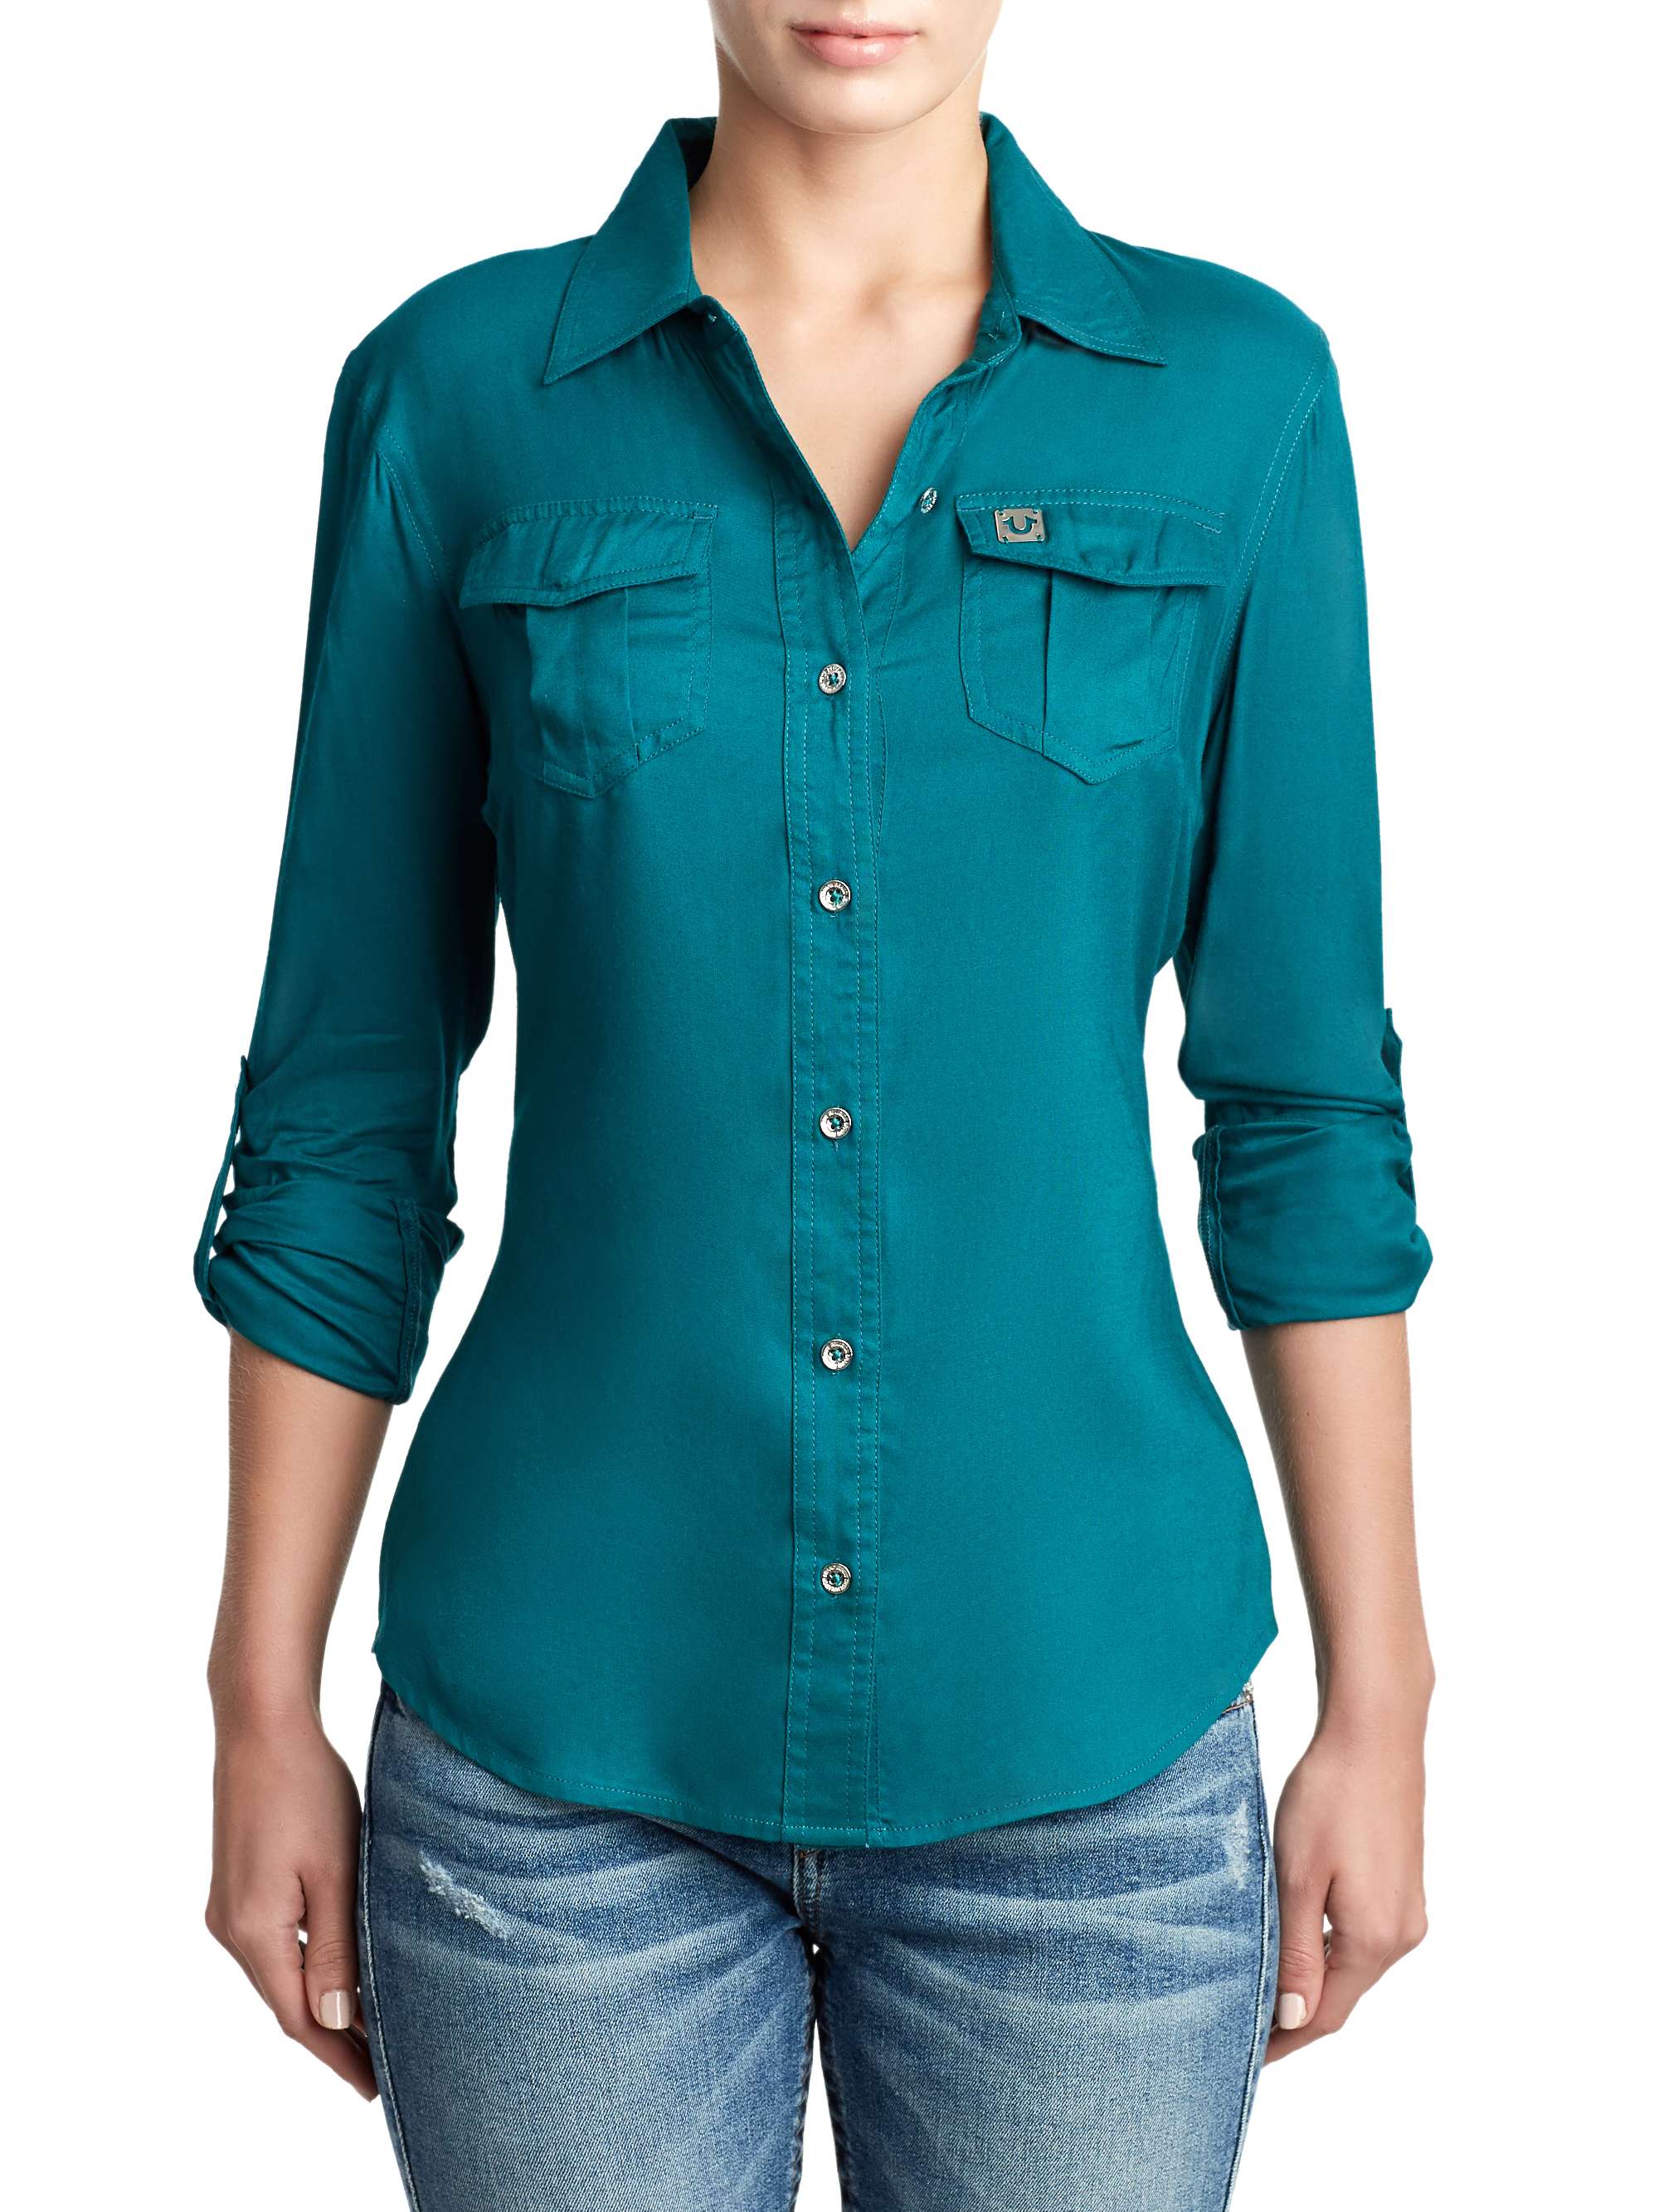 WOMENS BUTTON UP BLOUSE